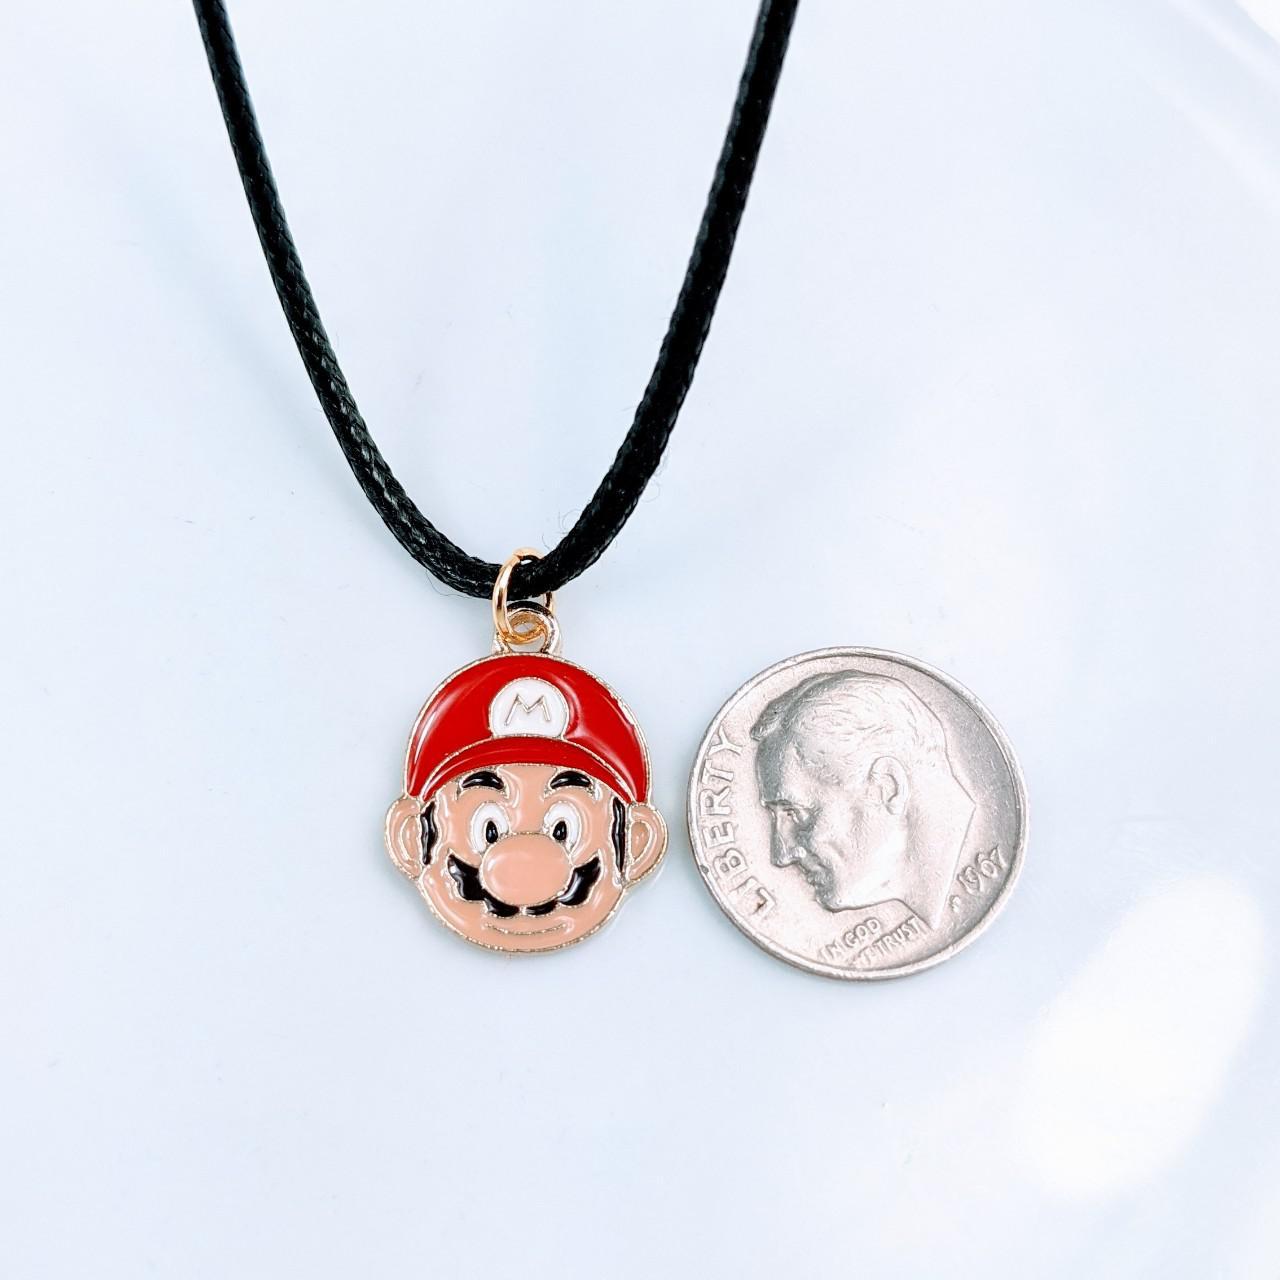 Product Image 3 - Mario Brothers Necklace
Brand new. 

Black